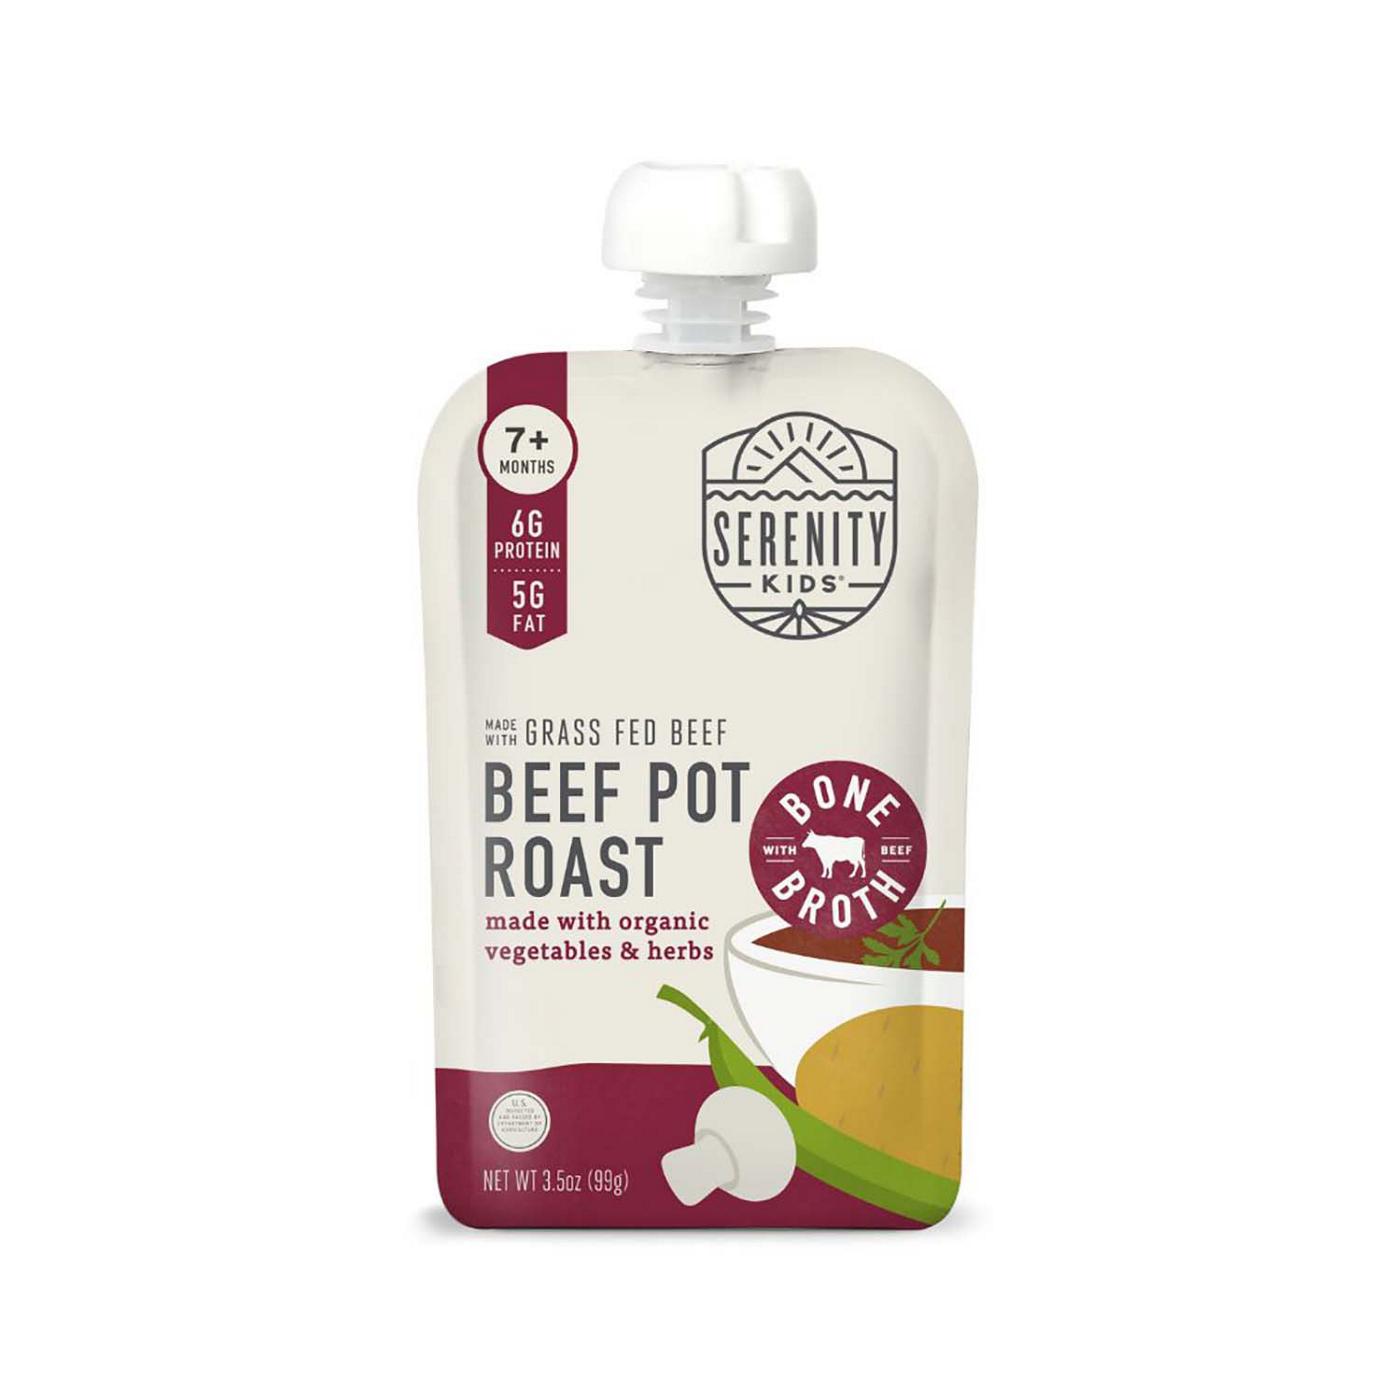 Serenity Kids Beef Pot Roast with Bone Broth Baby Food Pouch; image 1 of 7